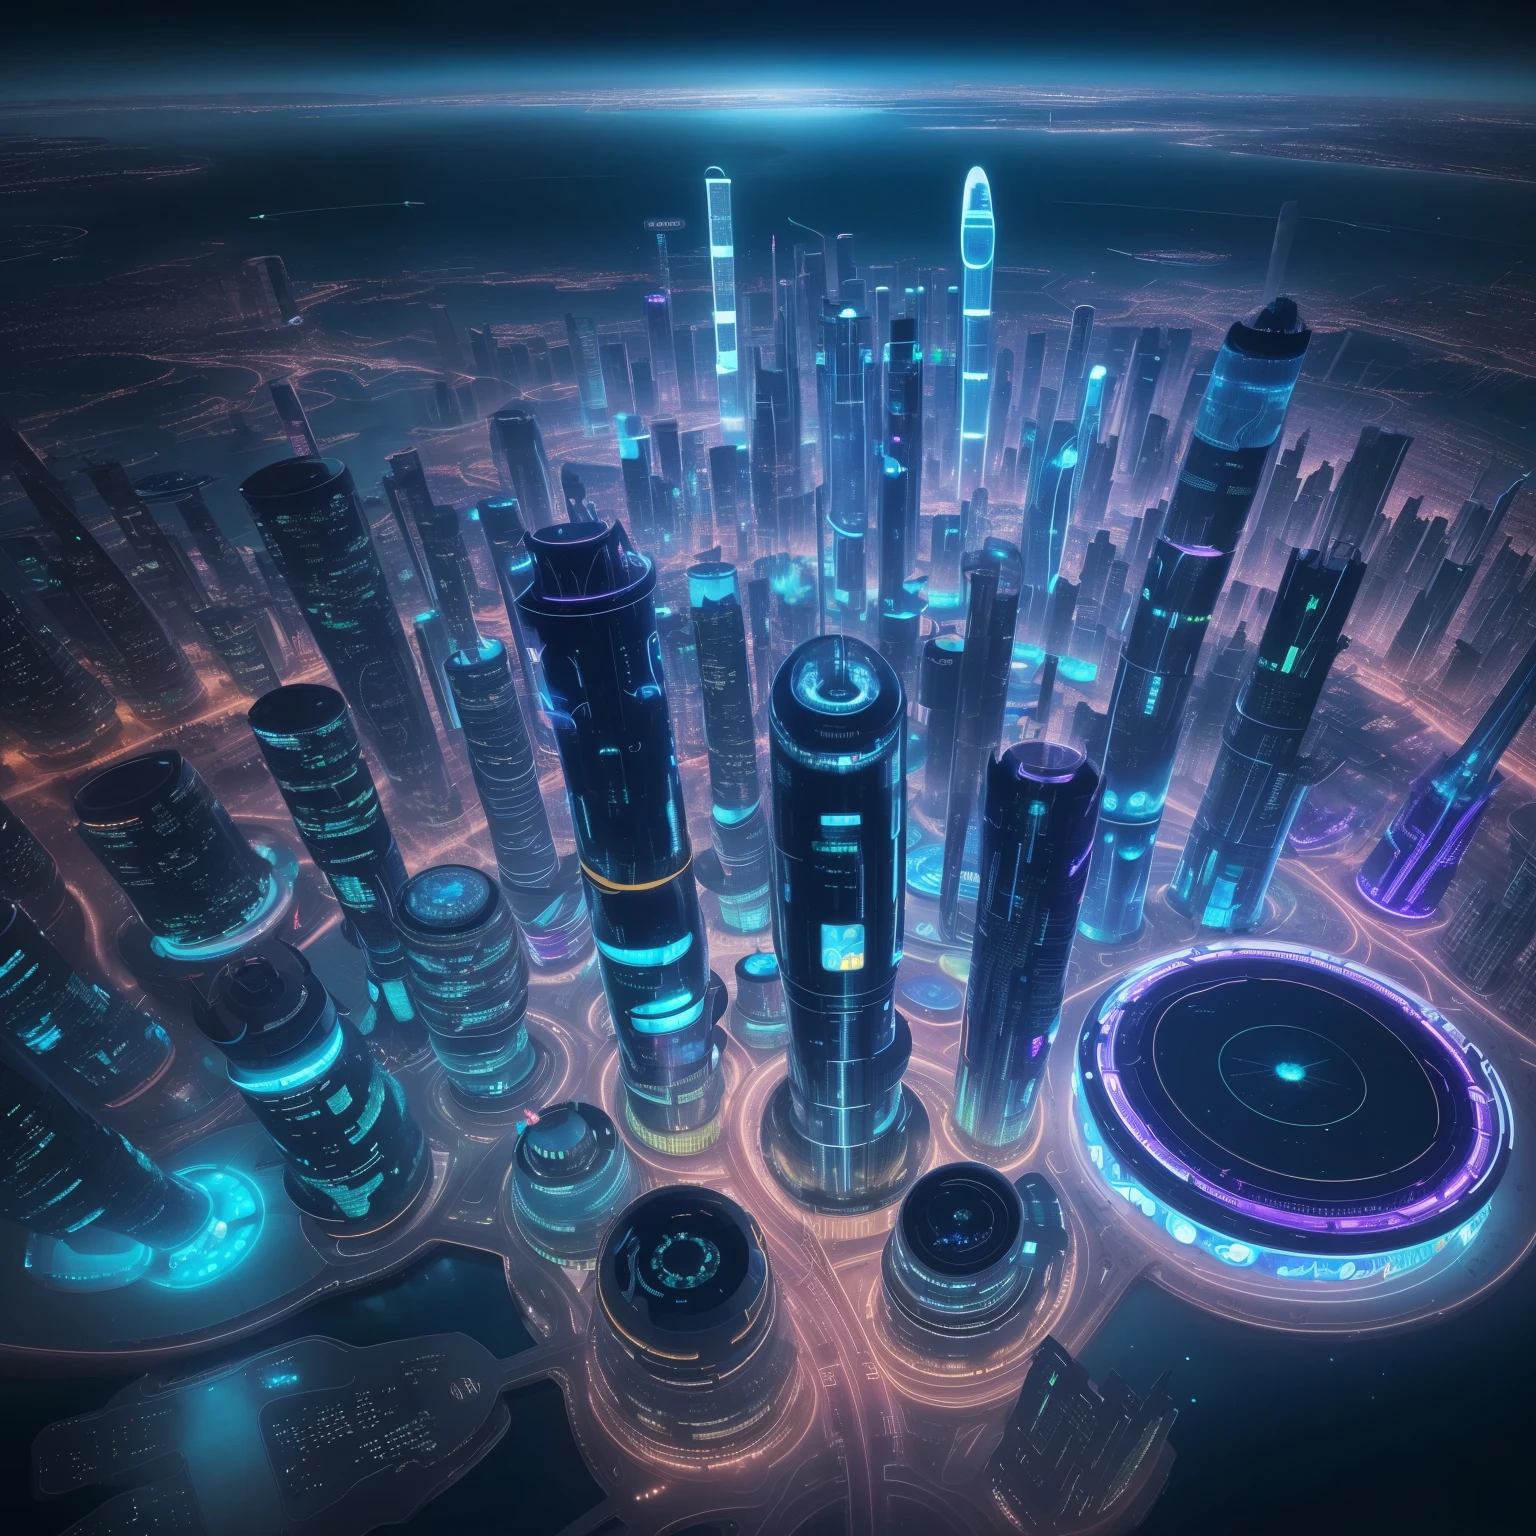 City night scene with circular structure in the middle, Spaceport of the future, photo of The city of the futurescape, Utopian cities of the future, in fantasy sci - fi city, futuristic alien city, The city of the futurescape, alien The city of the future, BeautifulThe city of the future, otherwordly The city of the future, The city of the future scape, vista of The city of the future, The city of the future, spaceport city，A circular cyber city on the sea，A sense of future technology，center glowing，beautiful night，Neon light rendering